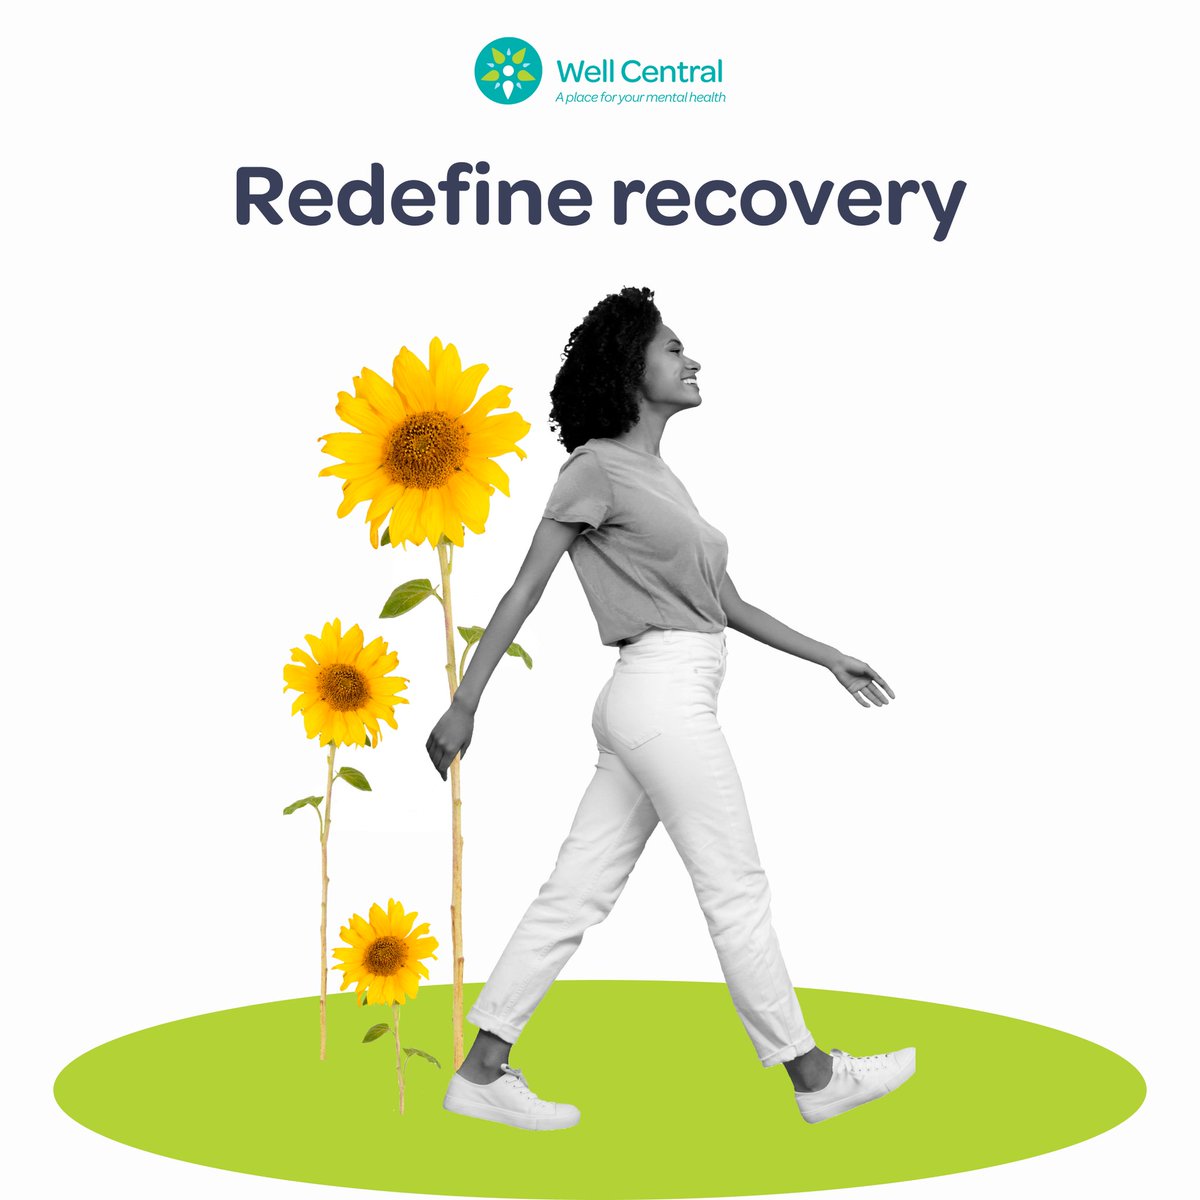 Redefine recovery.

Recovery is about growth, change and hope. Every person can move forward in some way, in spite of the challenges they face.

Recovery is a brave and beautiful process.

#WellCentral #werecover #recoveryispossible #redefinerecovery #cmha #recoveryisbeautiful